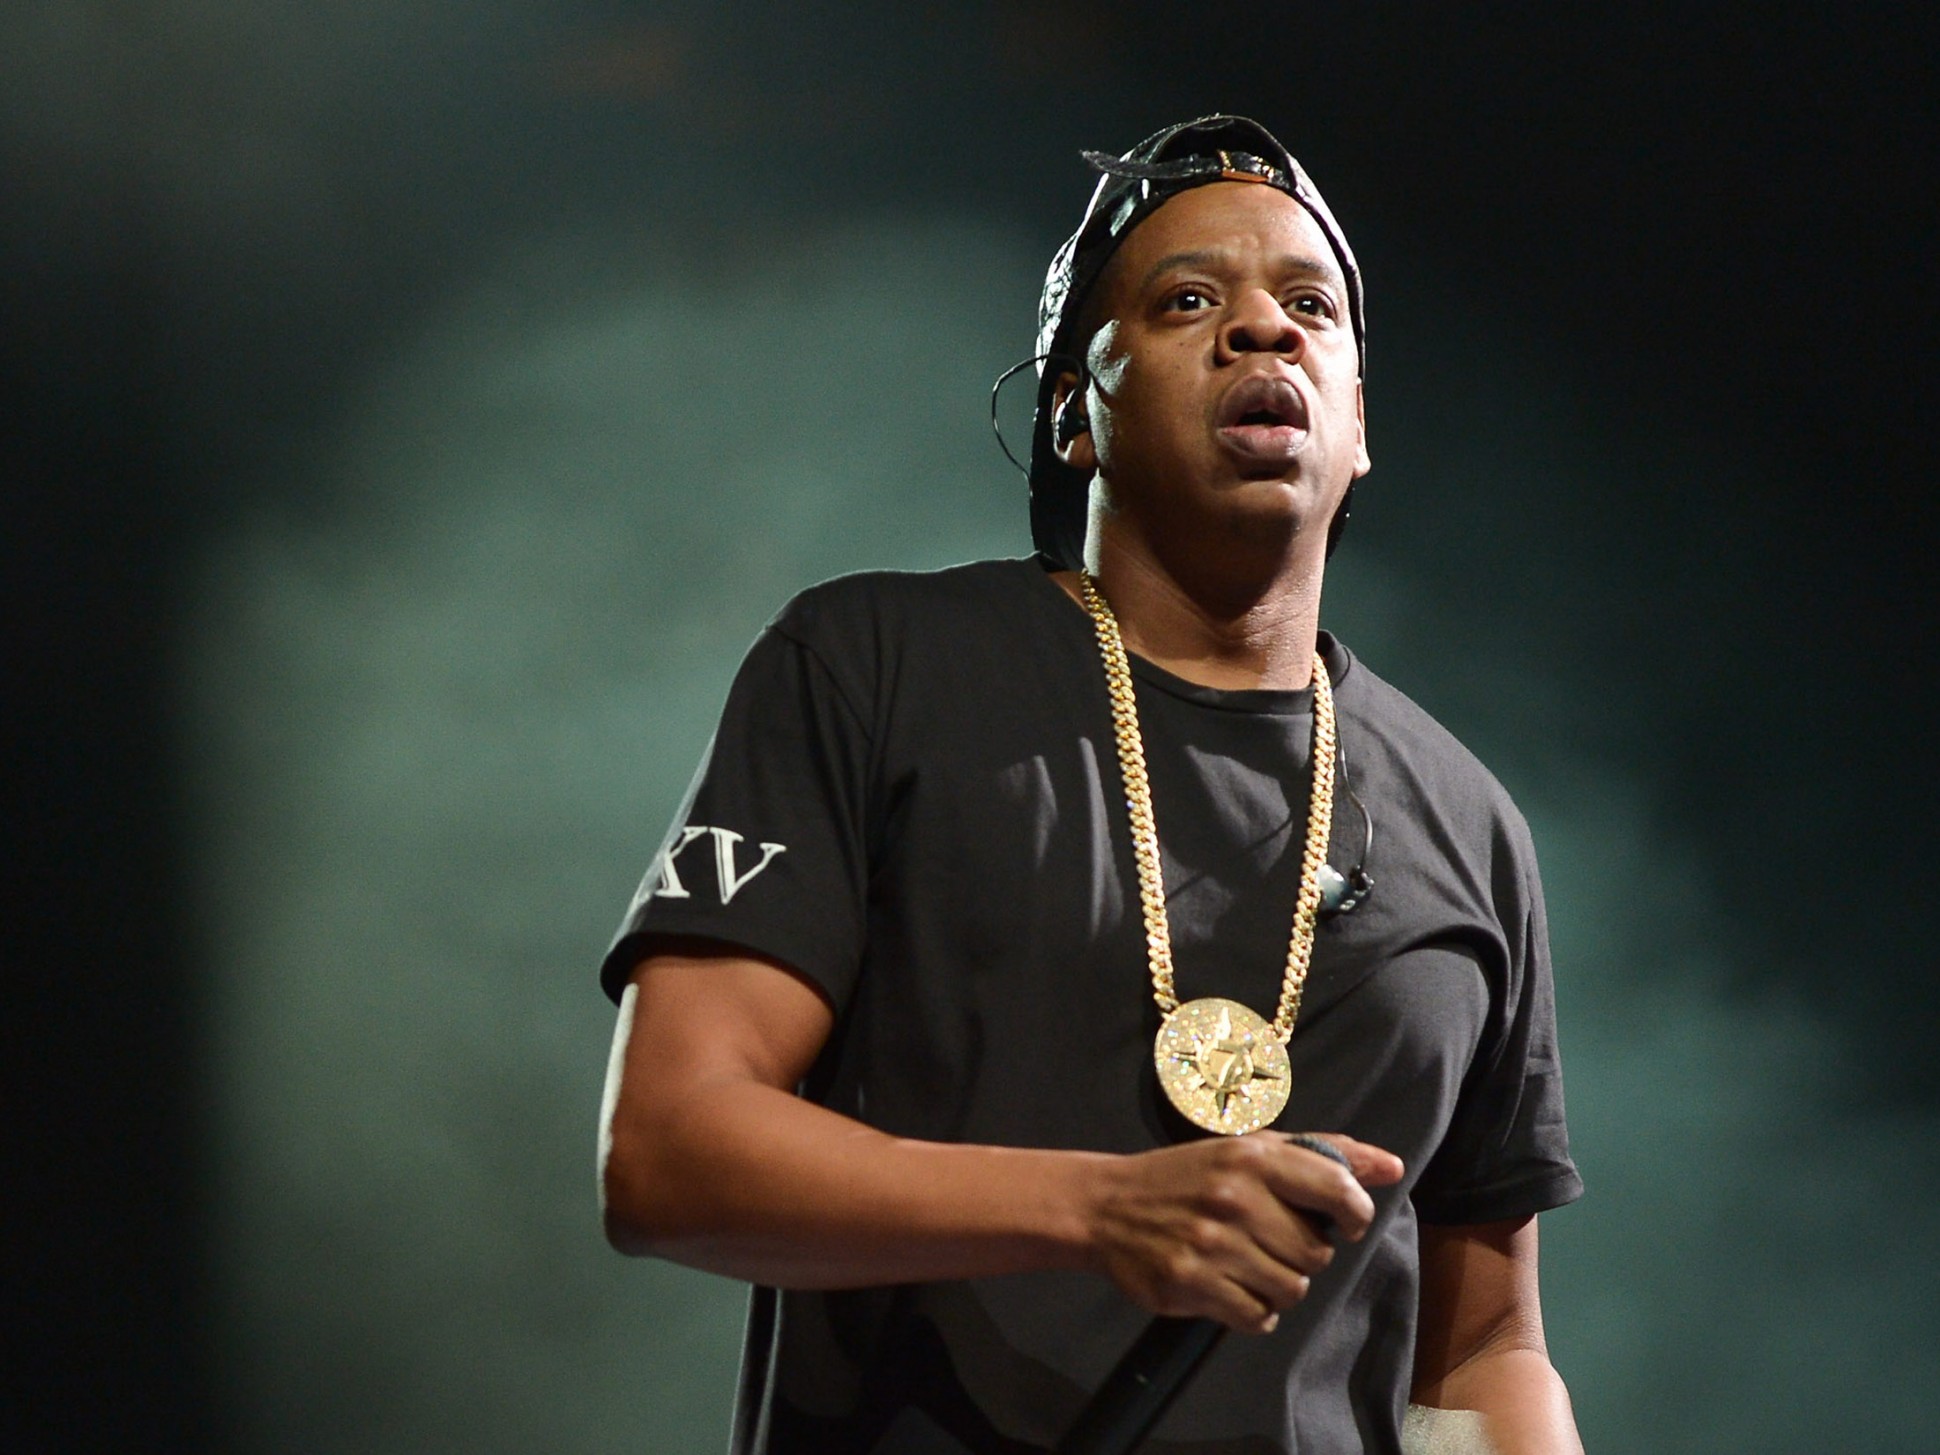 Jay Z's Upcoming Album is Going to Available Ahead of Time in a Couple of Cities